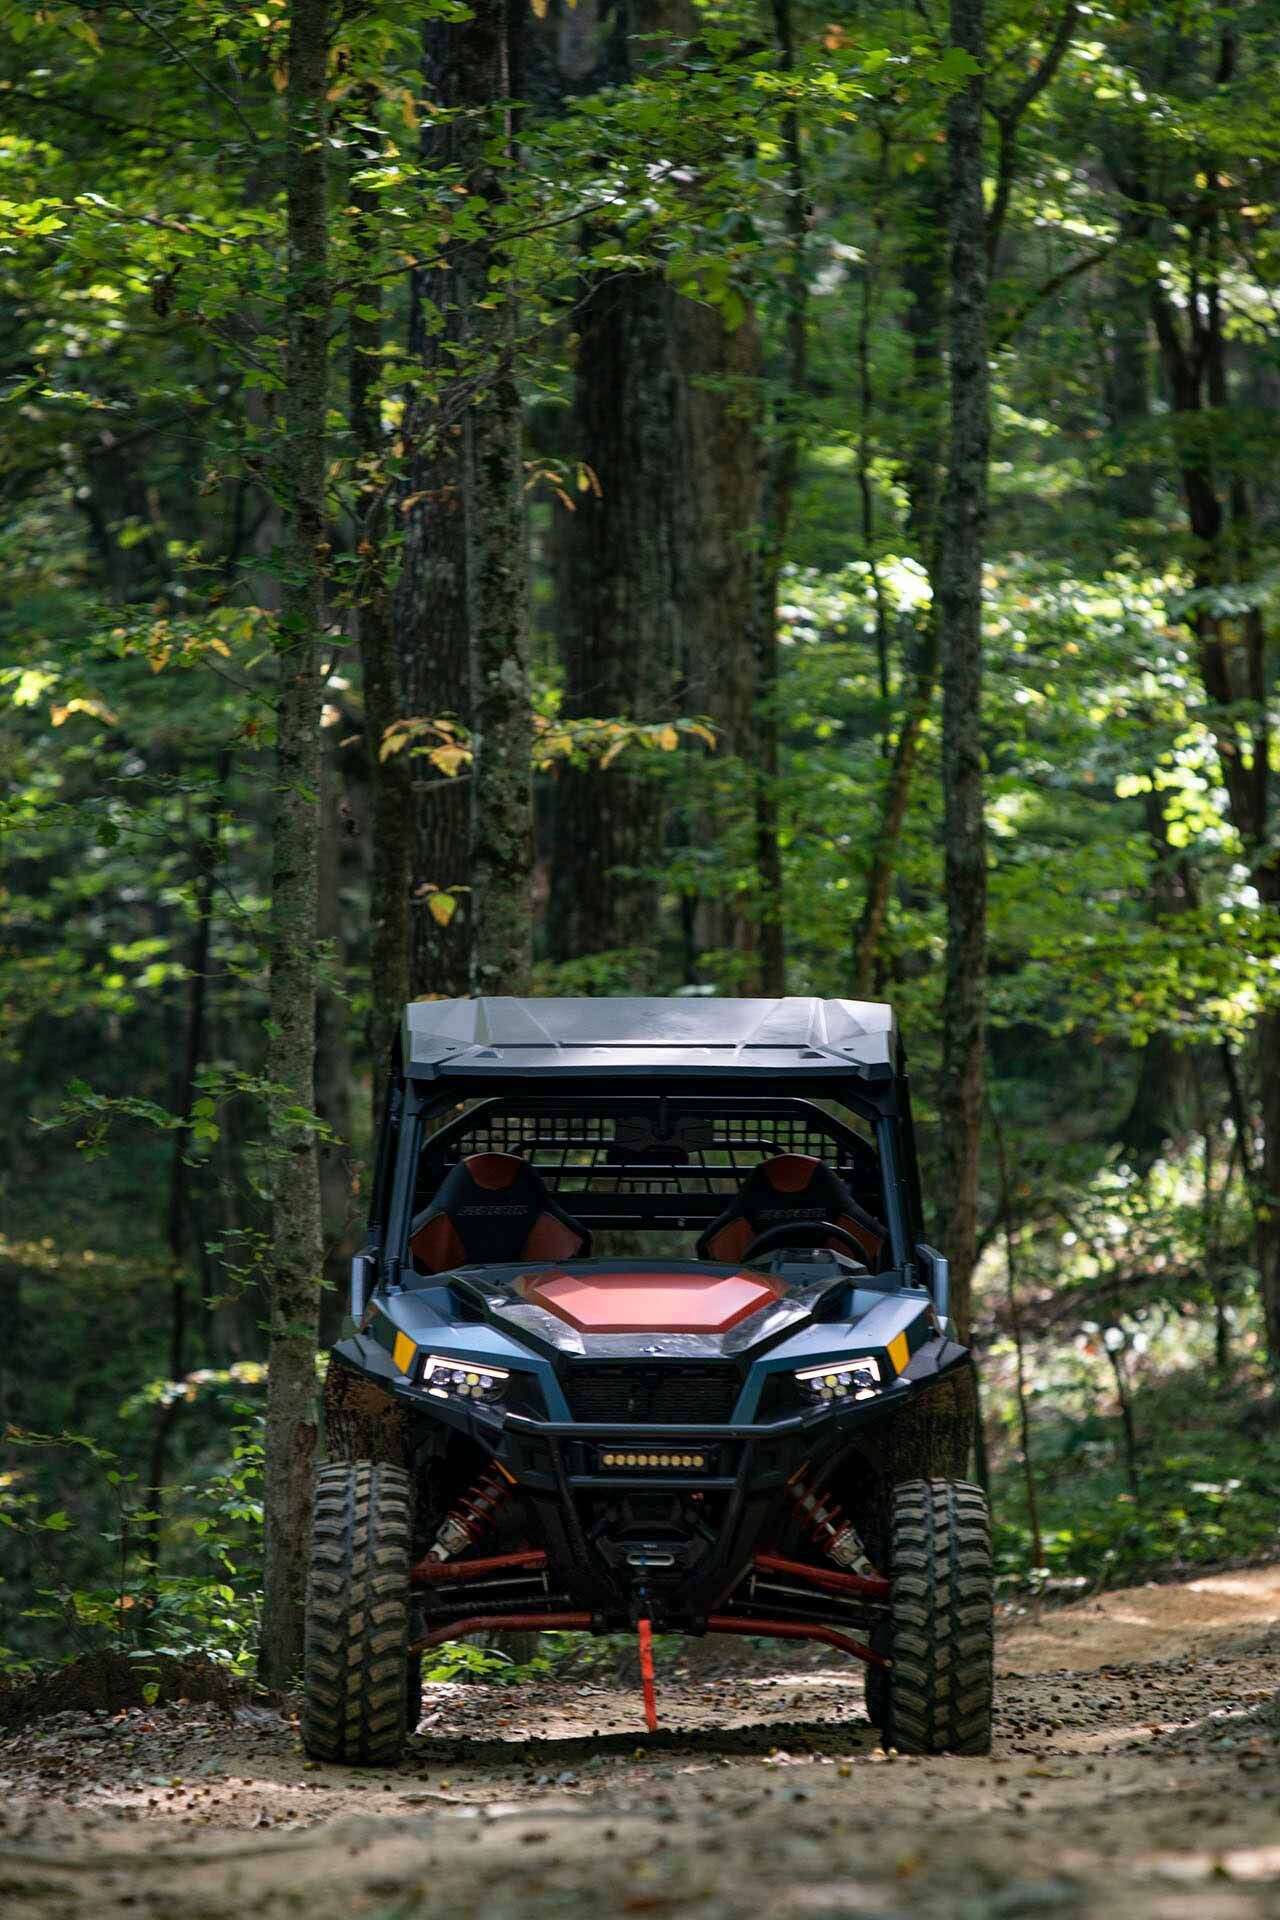 Looking good and performing better are the tip of the iceberg for the 2022 Polaris General XP 1000 Trailhead Edition. This limited-edition trim nets buyers a host of utility and comfort features that support going deep into the unknown, right out of the box.